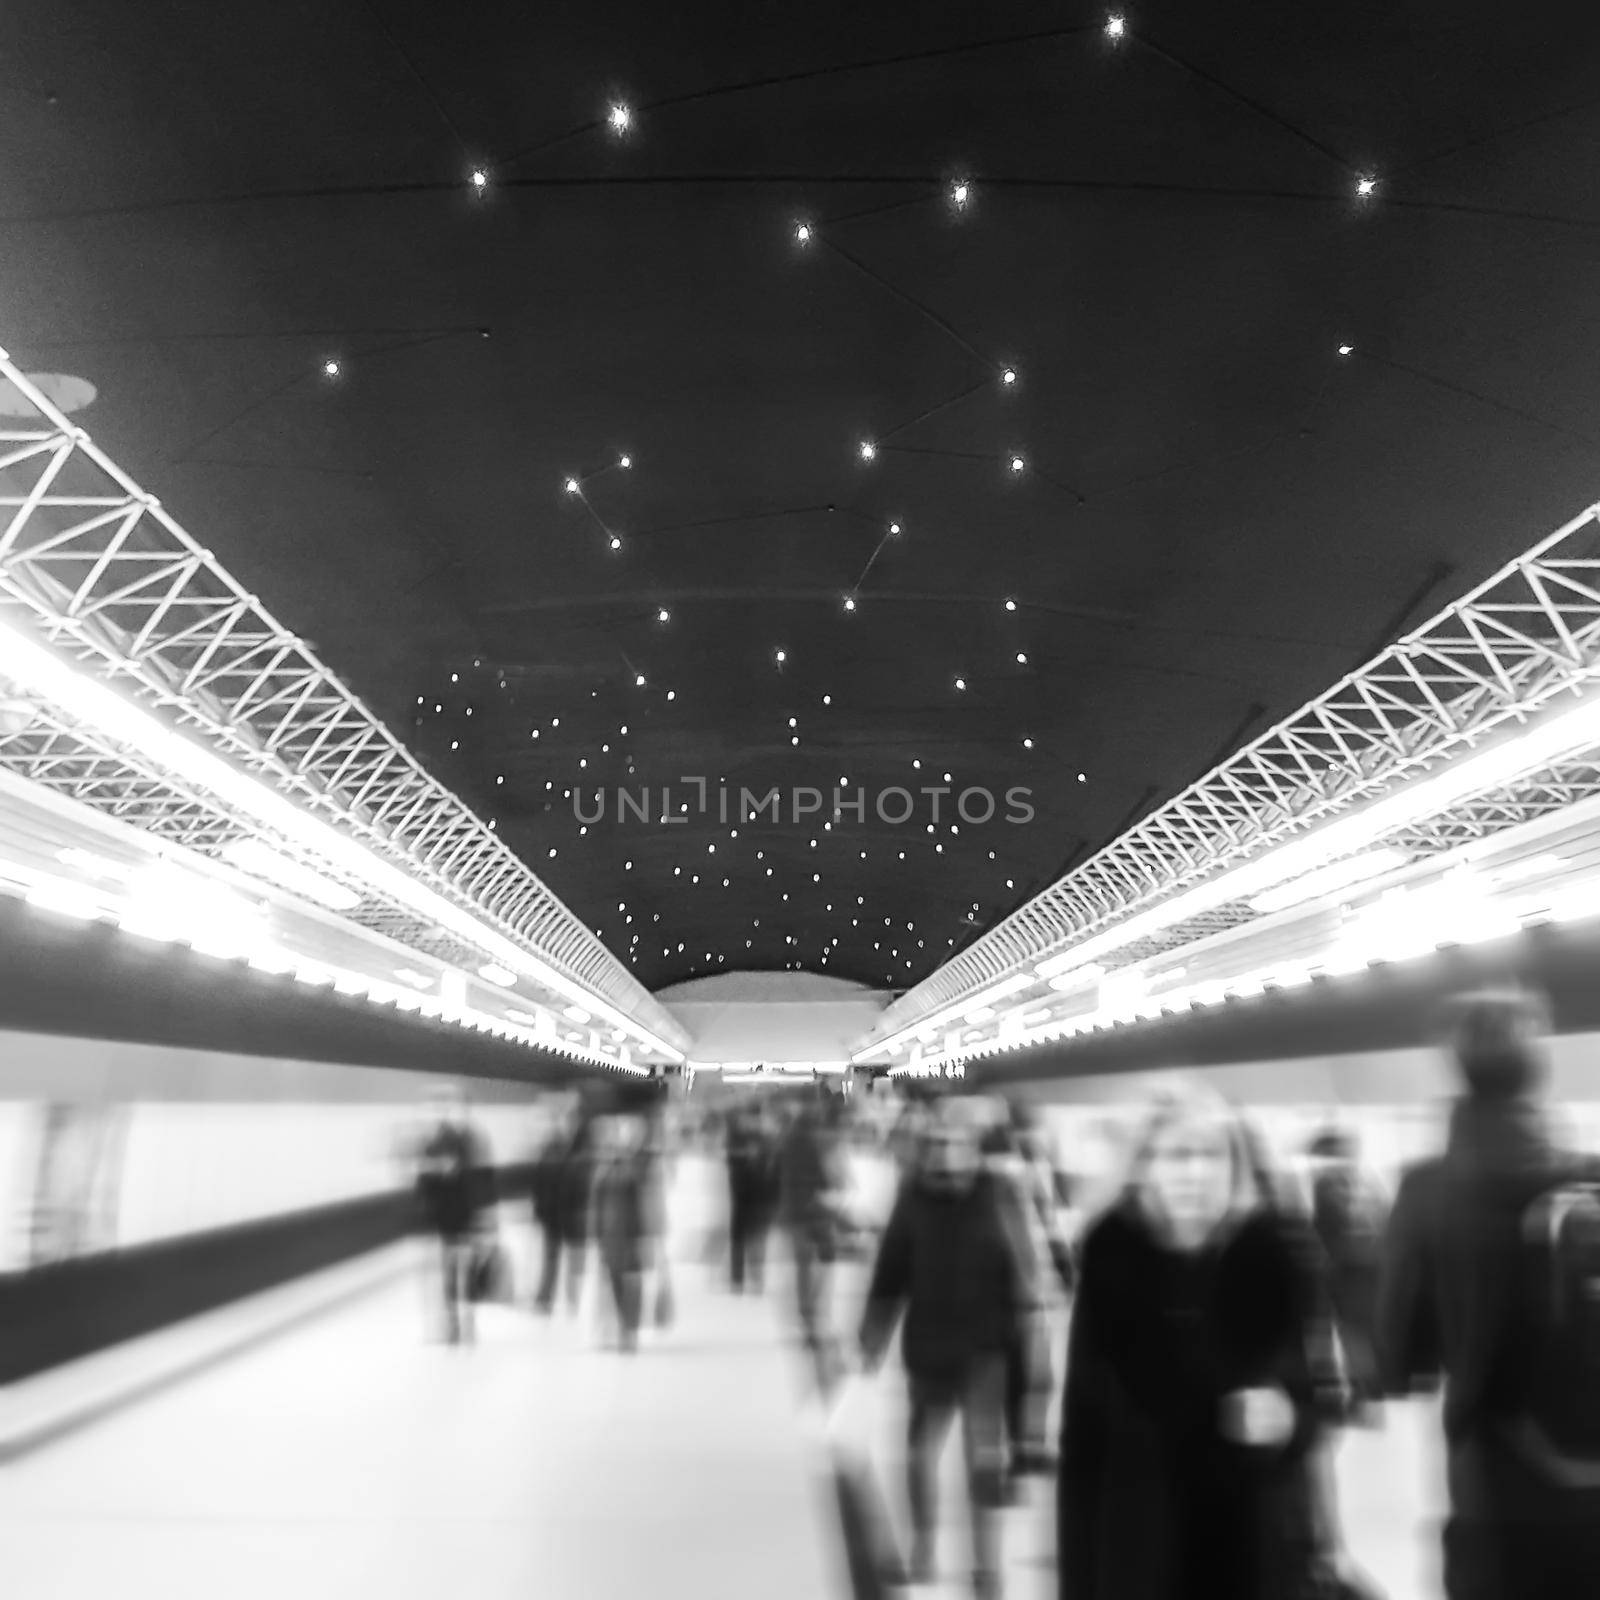 background image of people on the platform of the city station on Christmas evening. photo with copy space